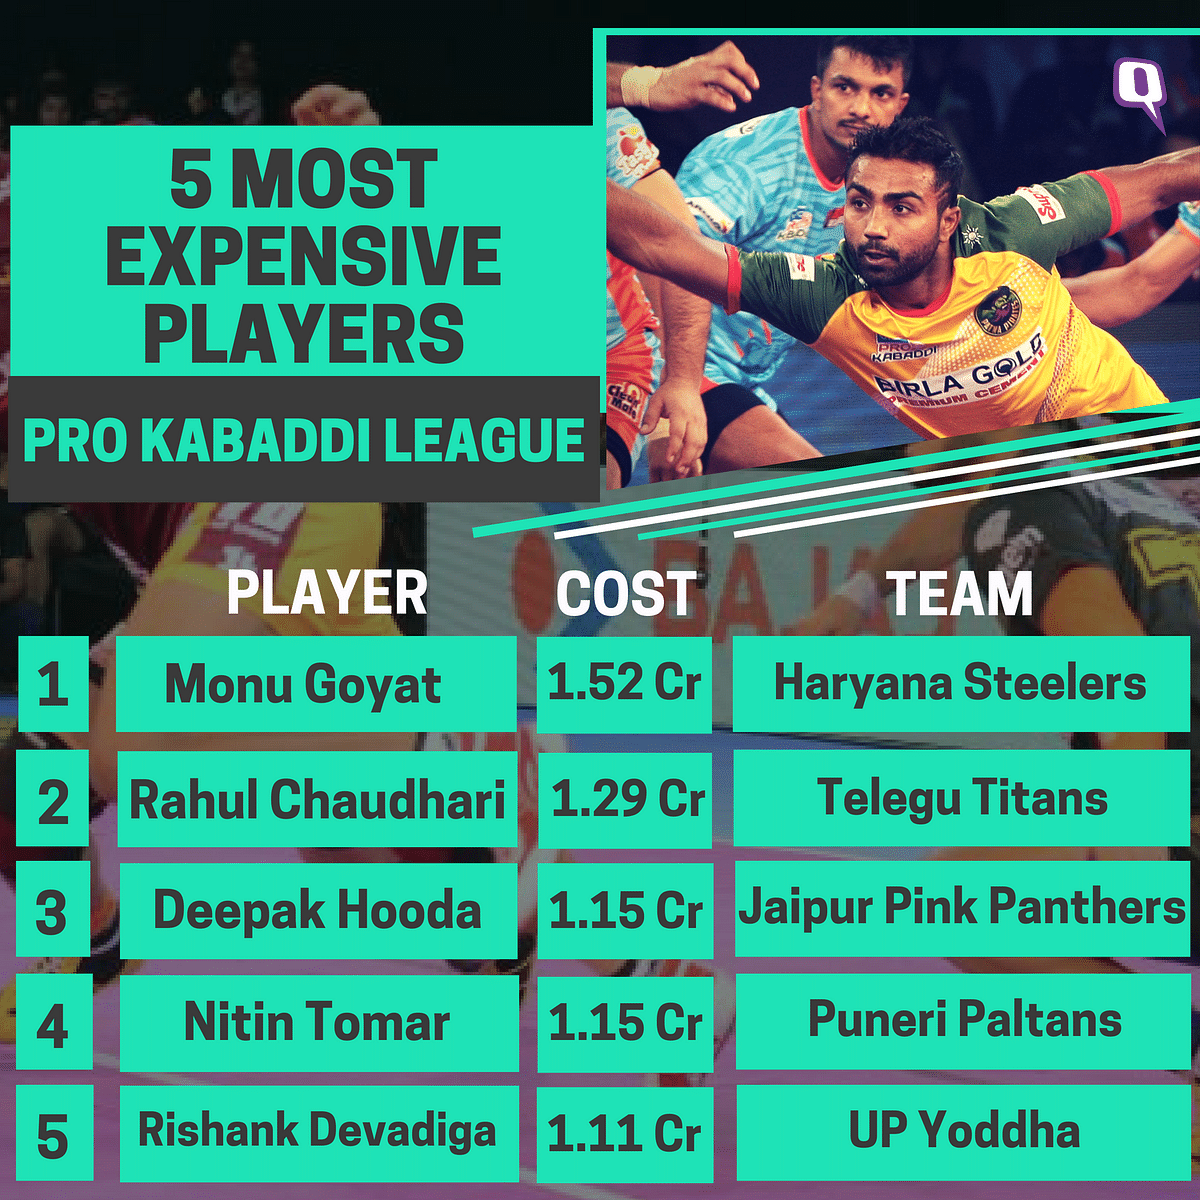 Monu Goyat became the most expensive player in PKL history after being bought by Haryana Steelers for Rs 1.51 crore.